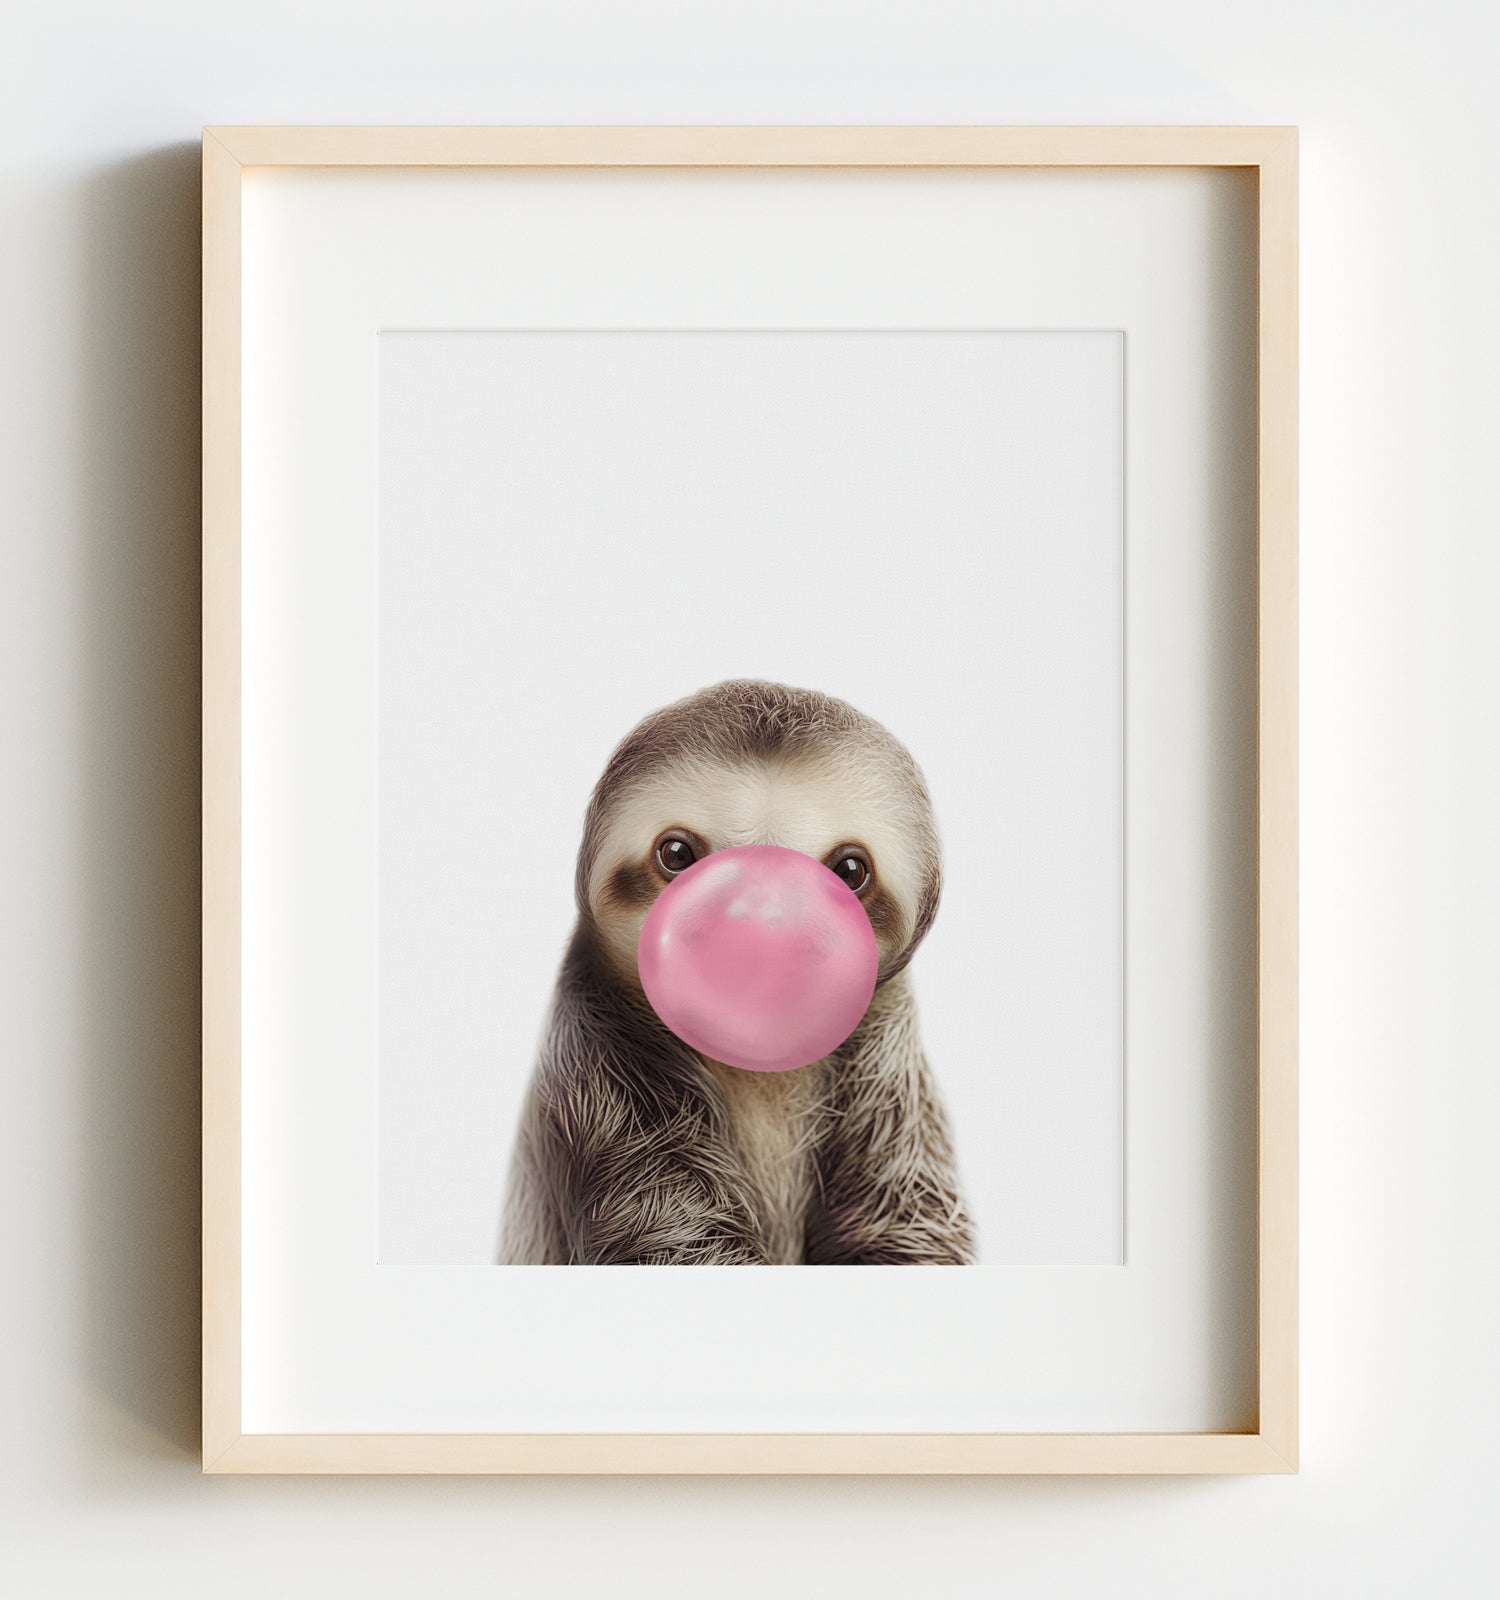 Baby Sloth - The Crown Prints